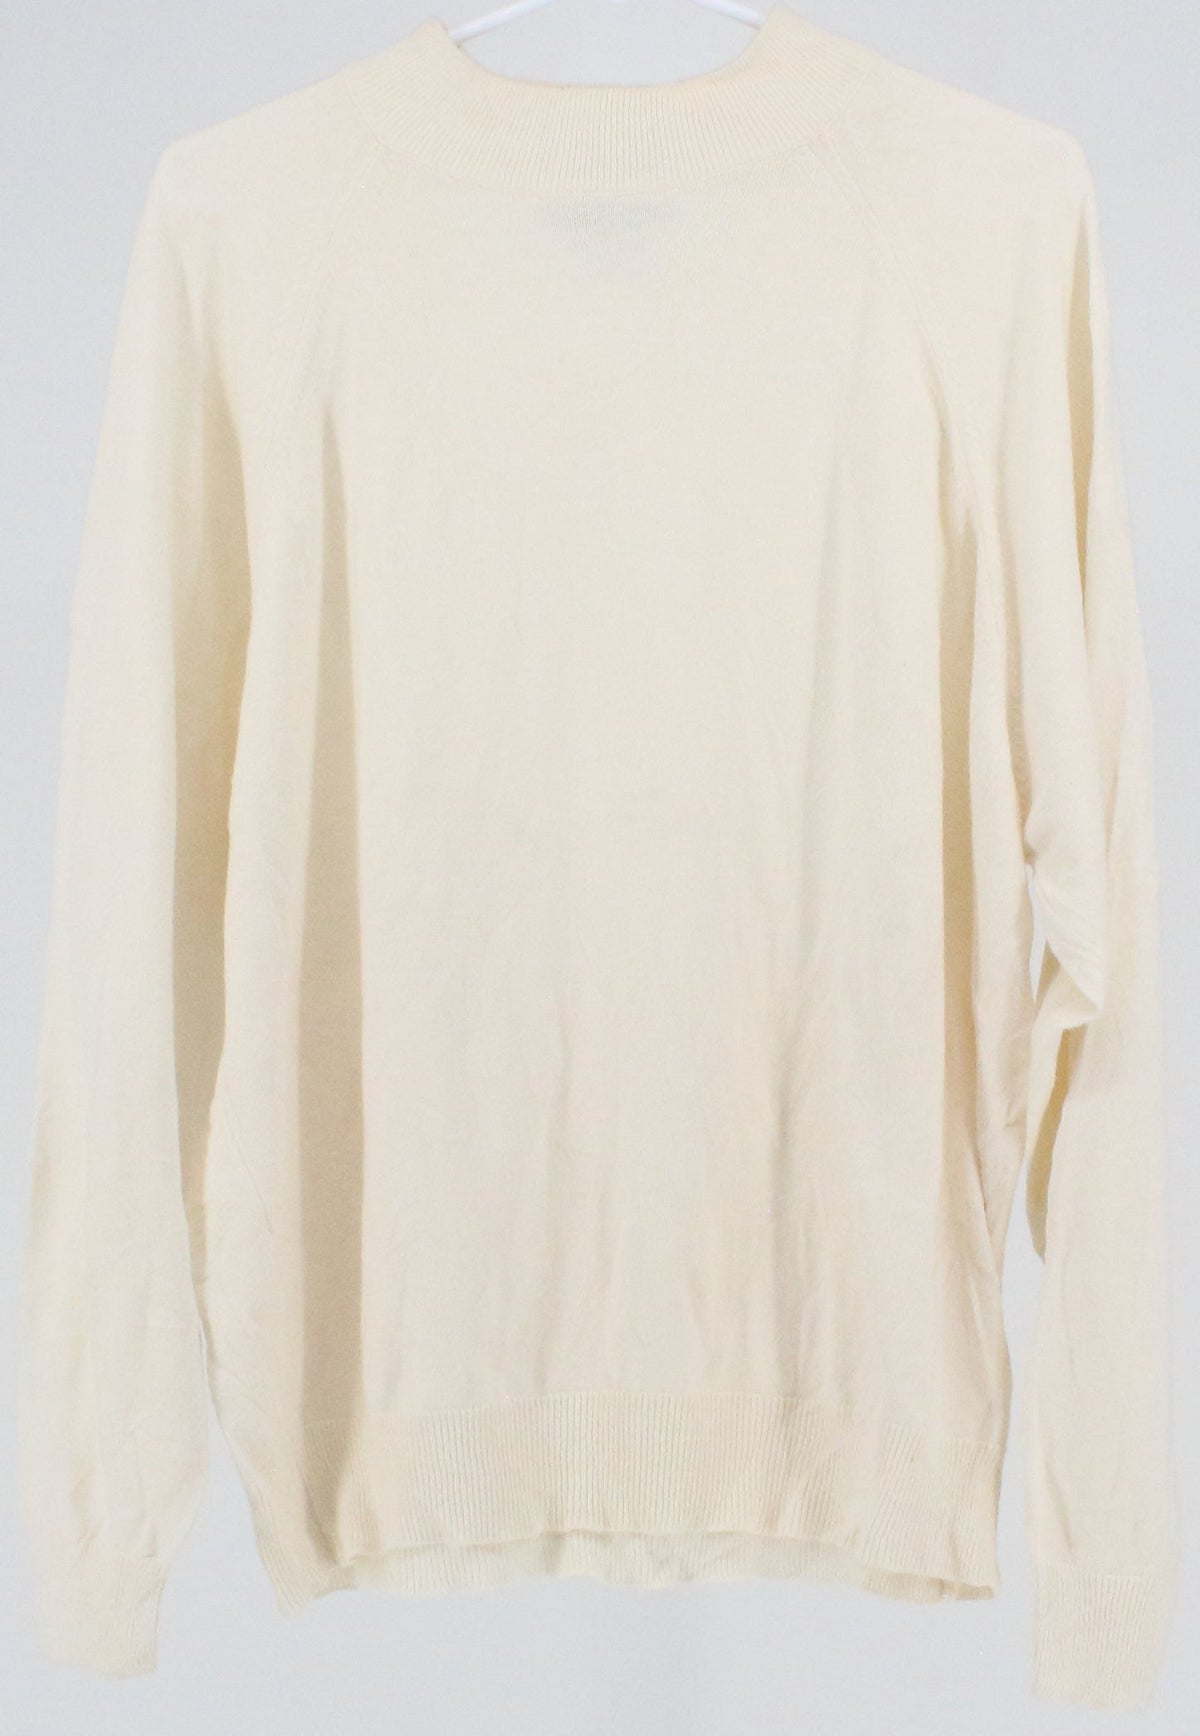 Parkhurst Collectibles Off White Mock Neck Women's Sweater